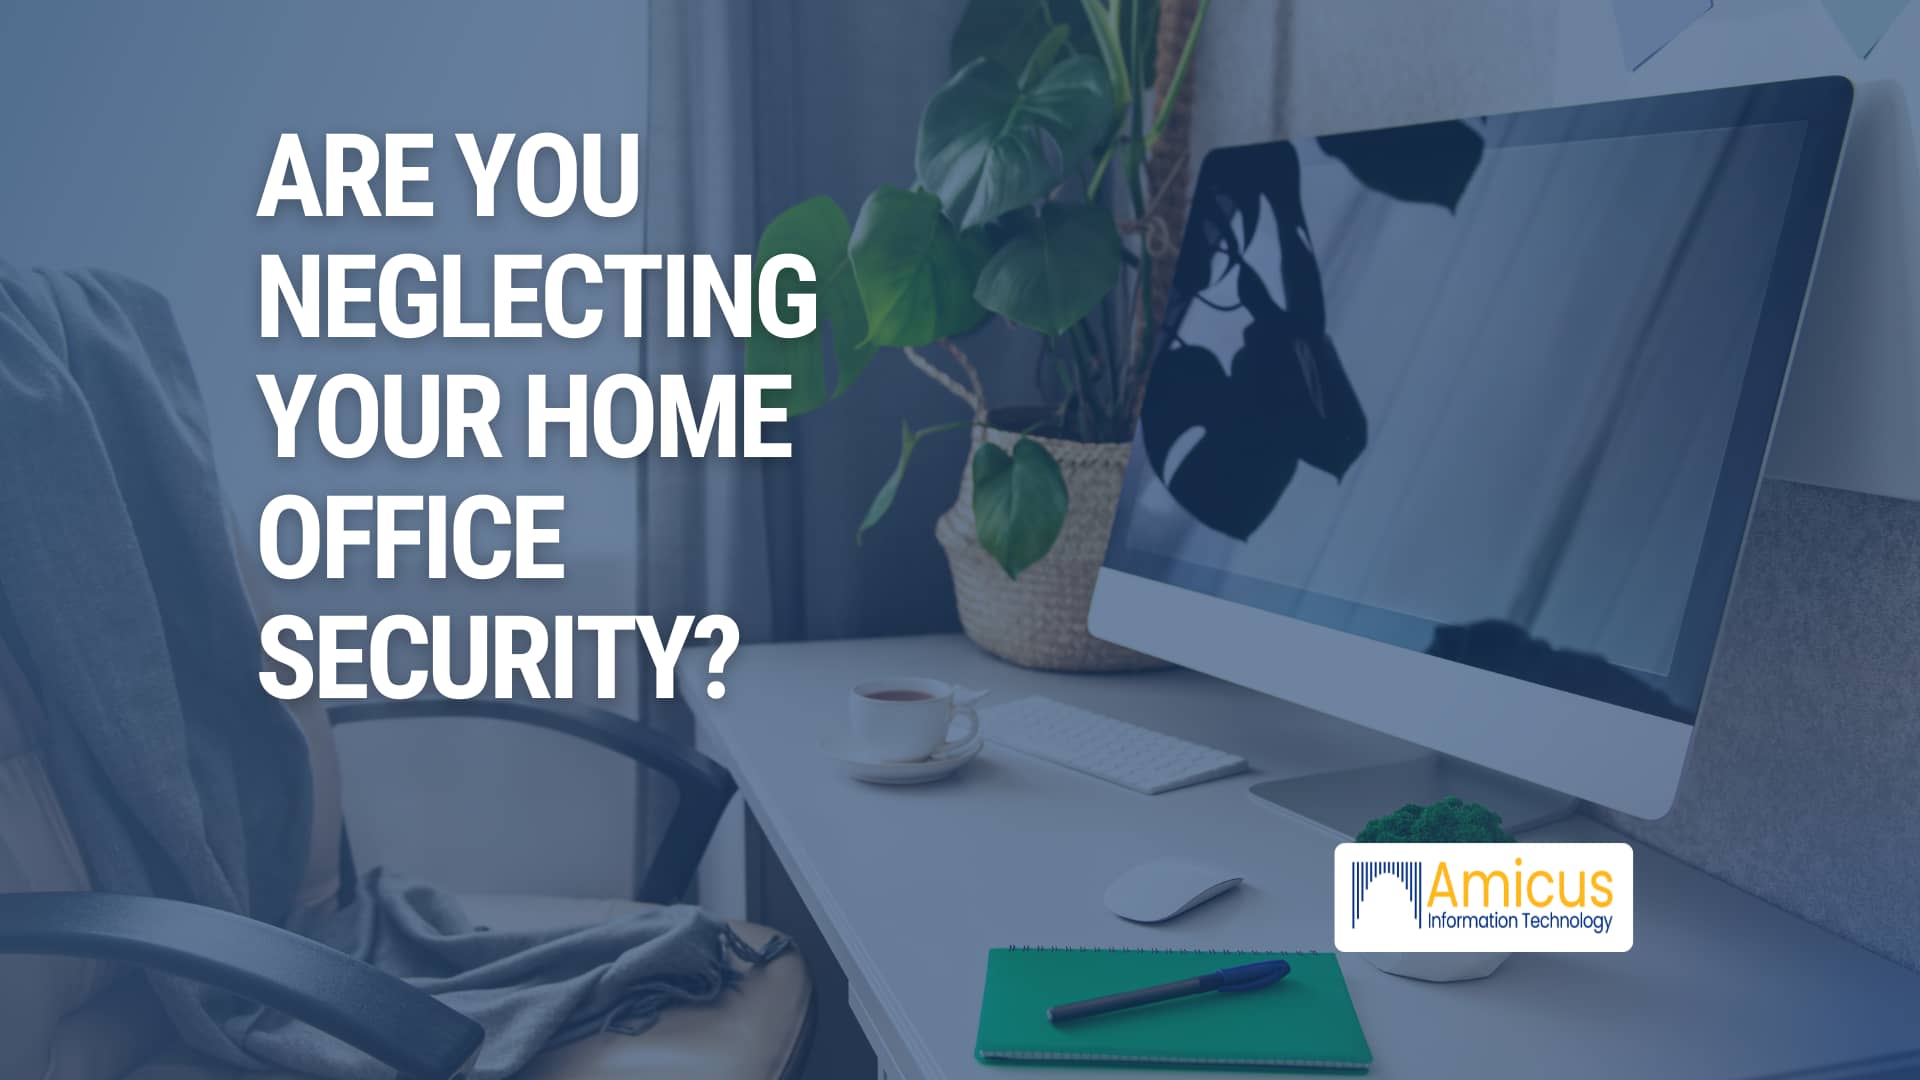 Home Office Security | Amicus IT | IT Support Services | Lawyers | Attorneys